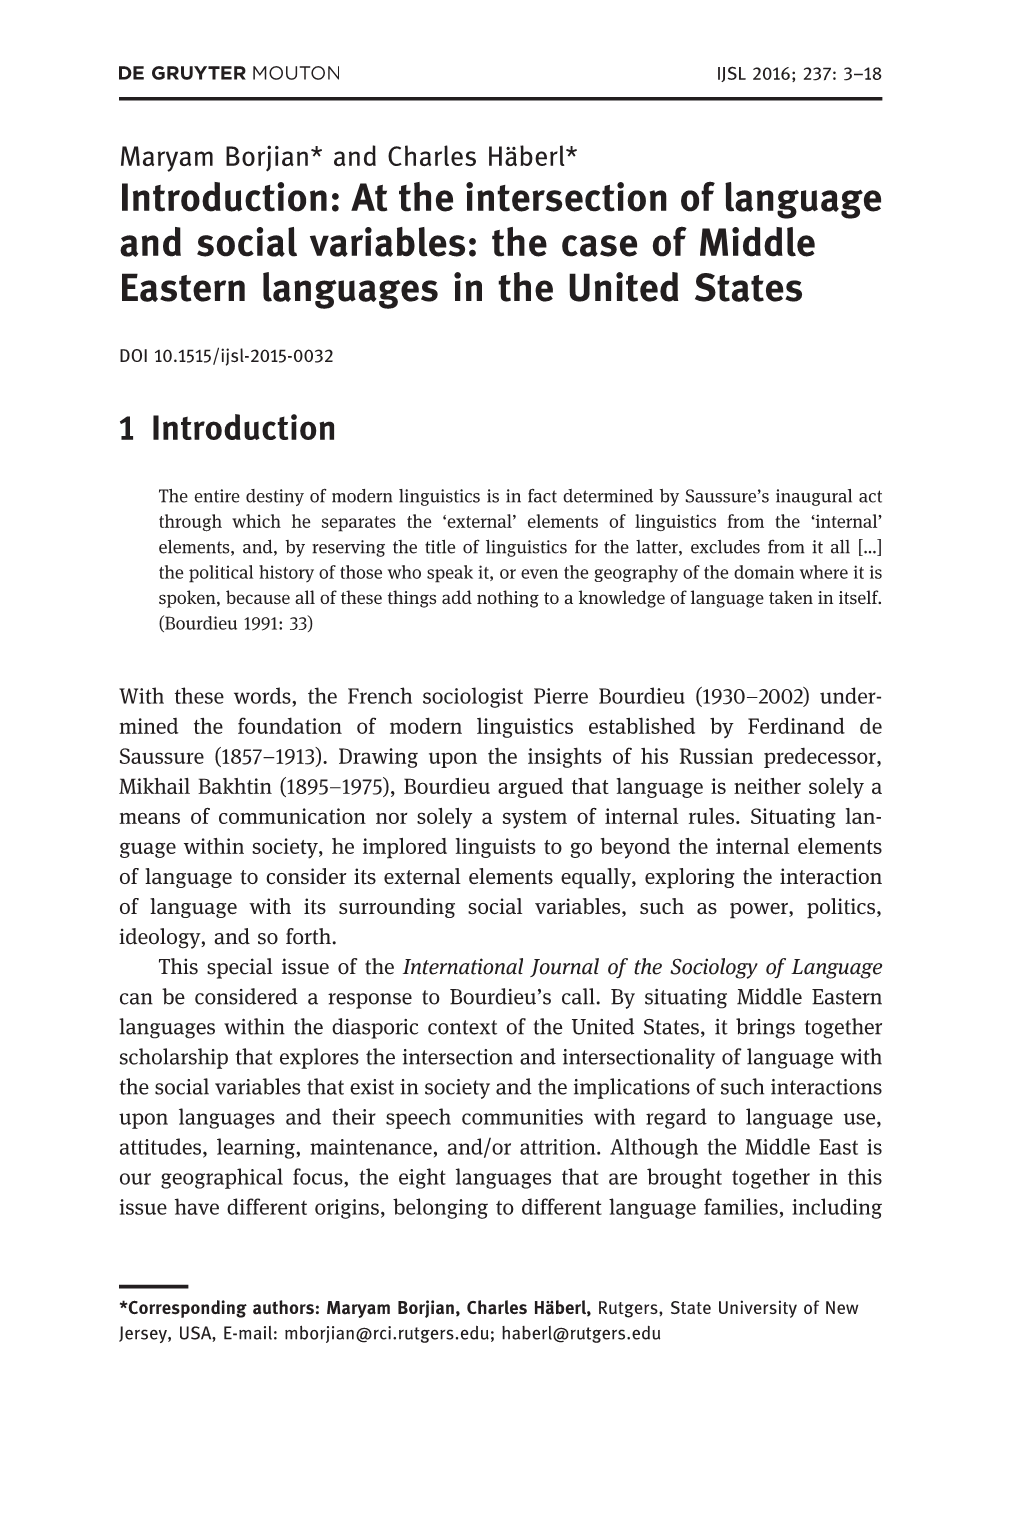 Introduction: at the Intersection of Language and Social Variables: the Case of Middle Eastern Languages in the United States